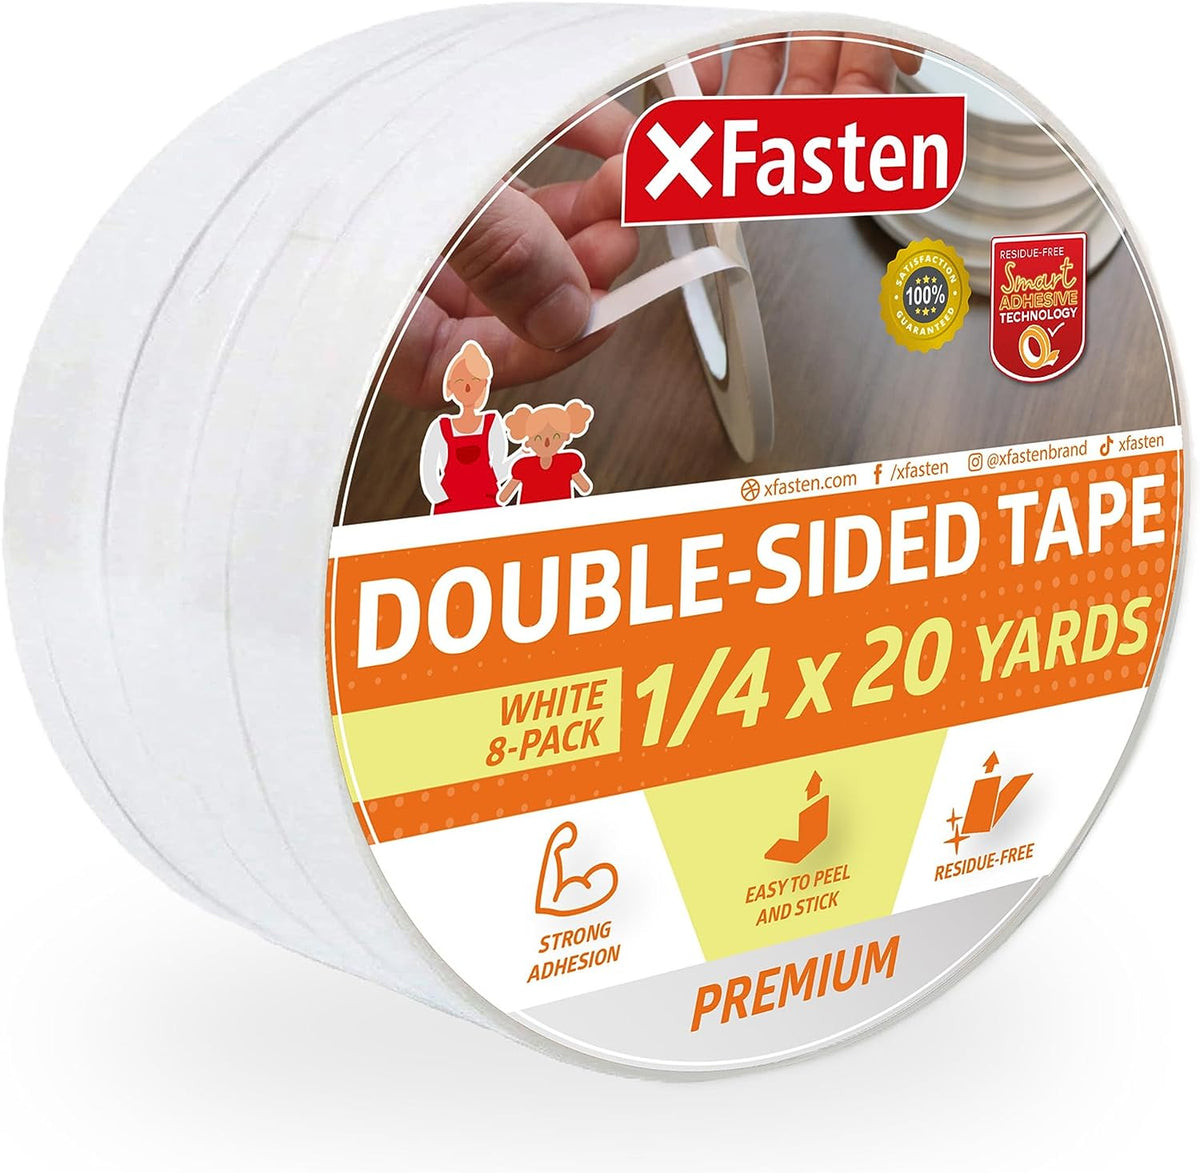 Buy XFasten Double Sided Tape Acrylic ing Tape Removable, 1-Inch x